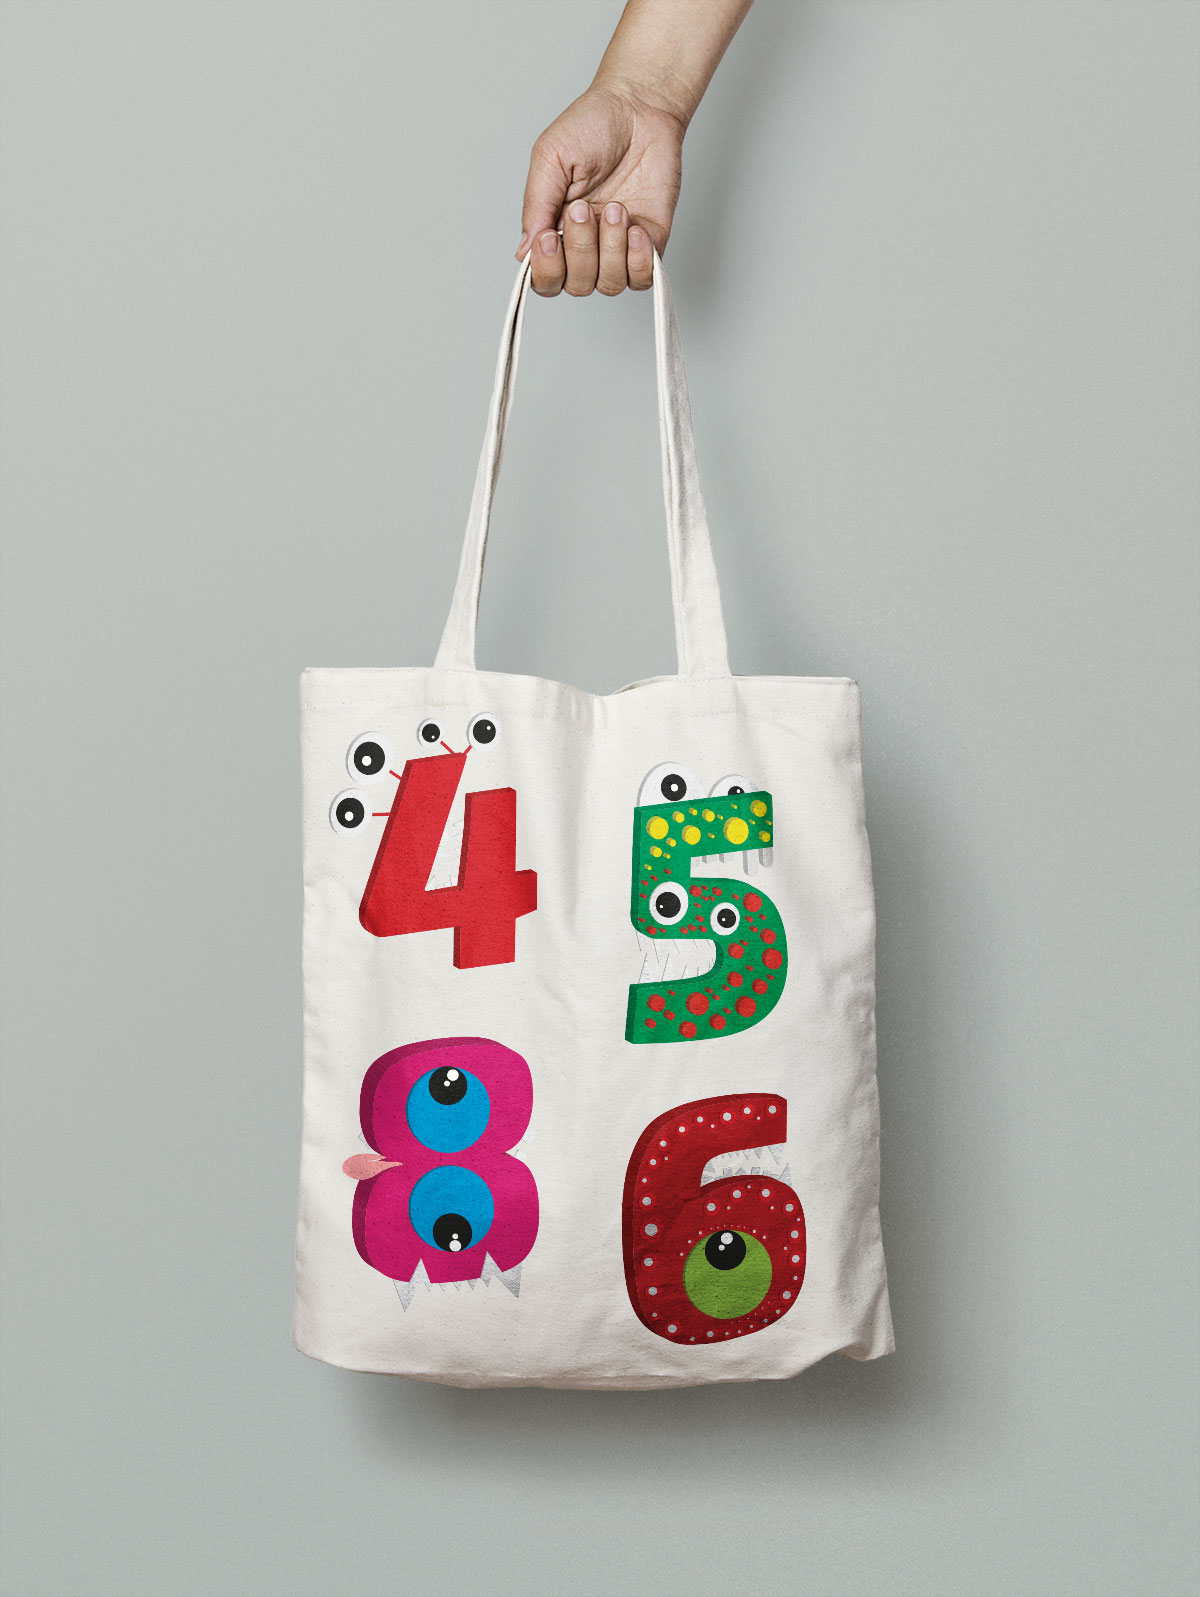 Bag numbers 36 days of type